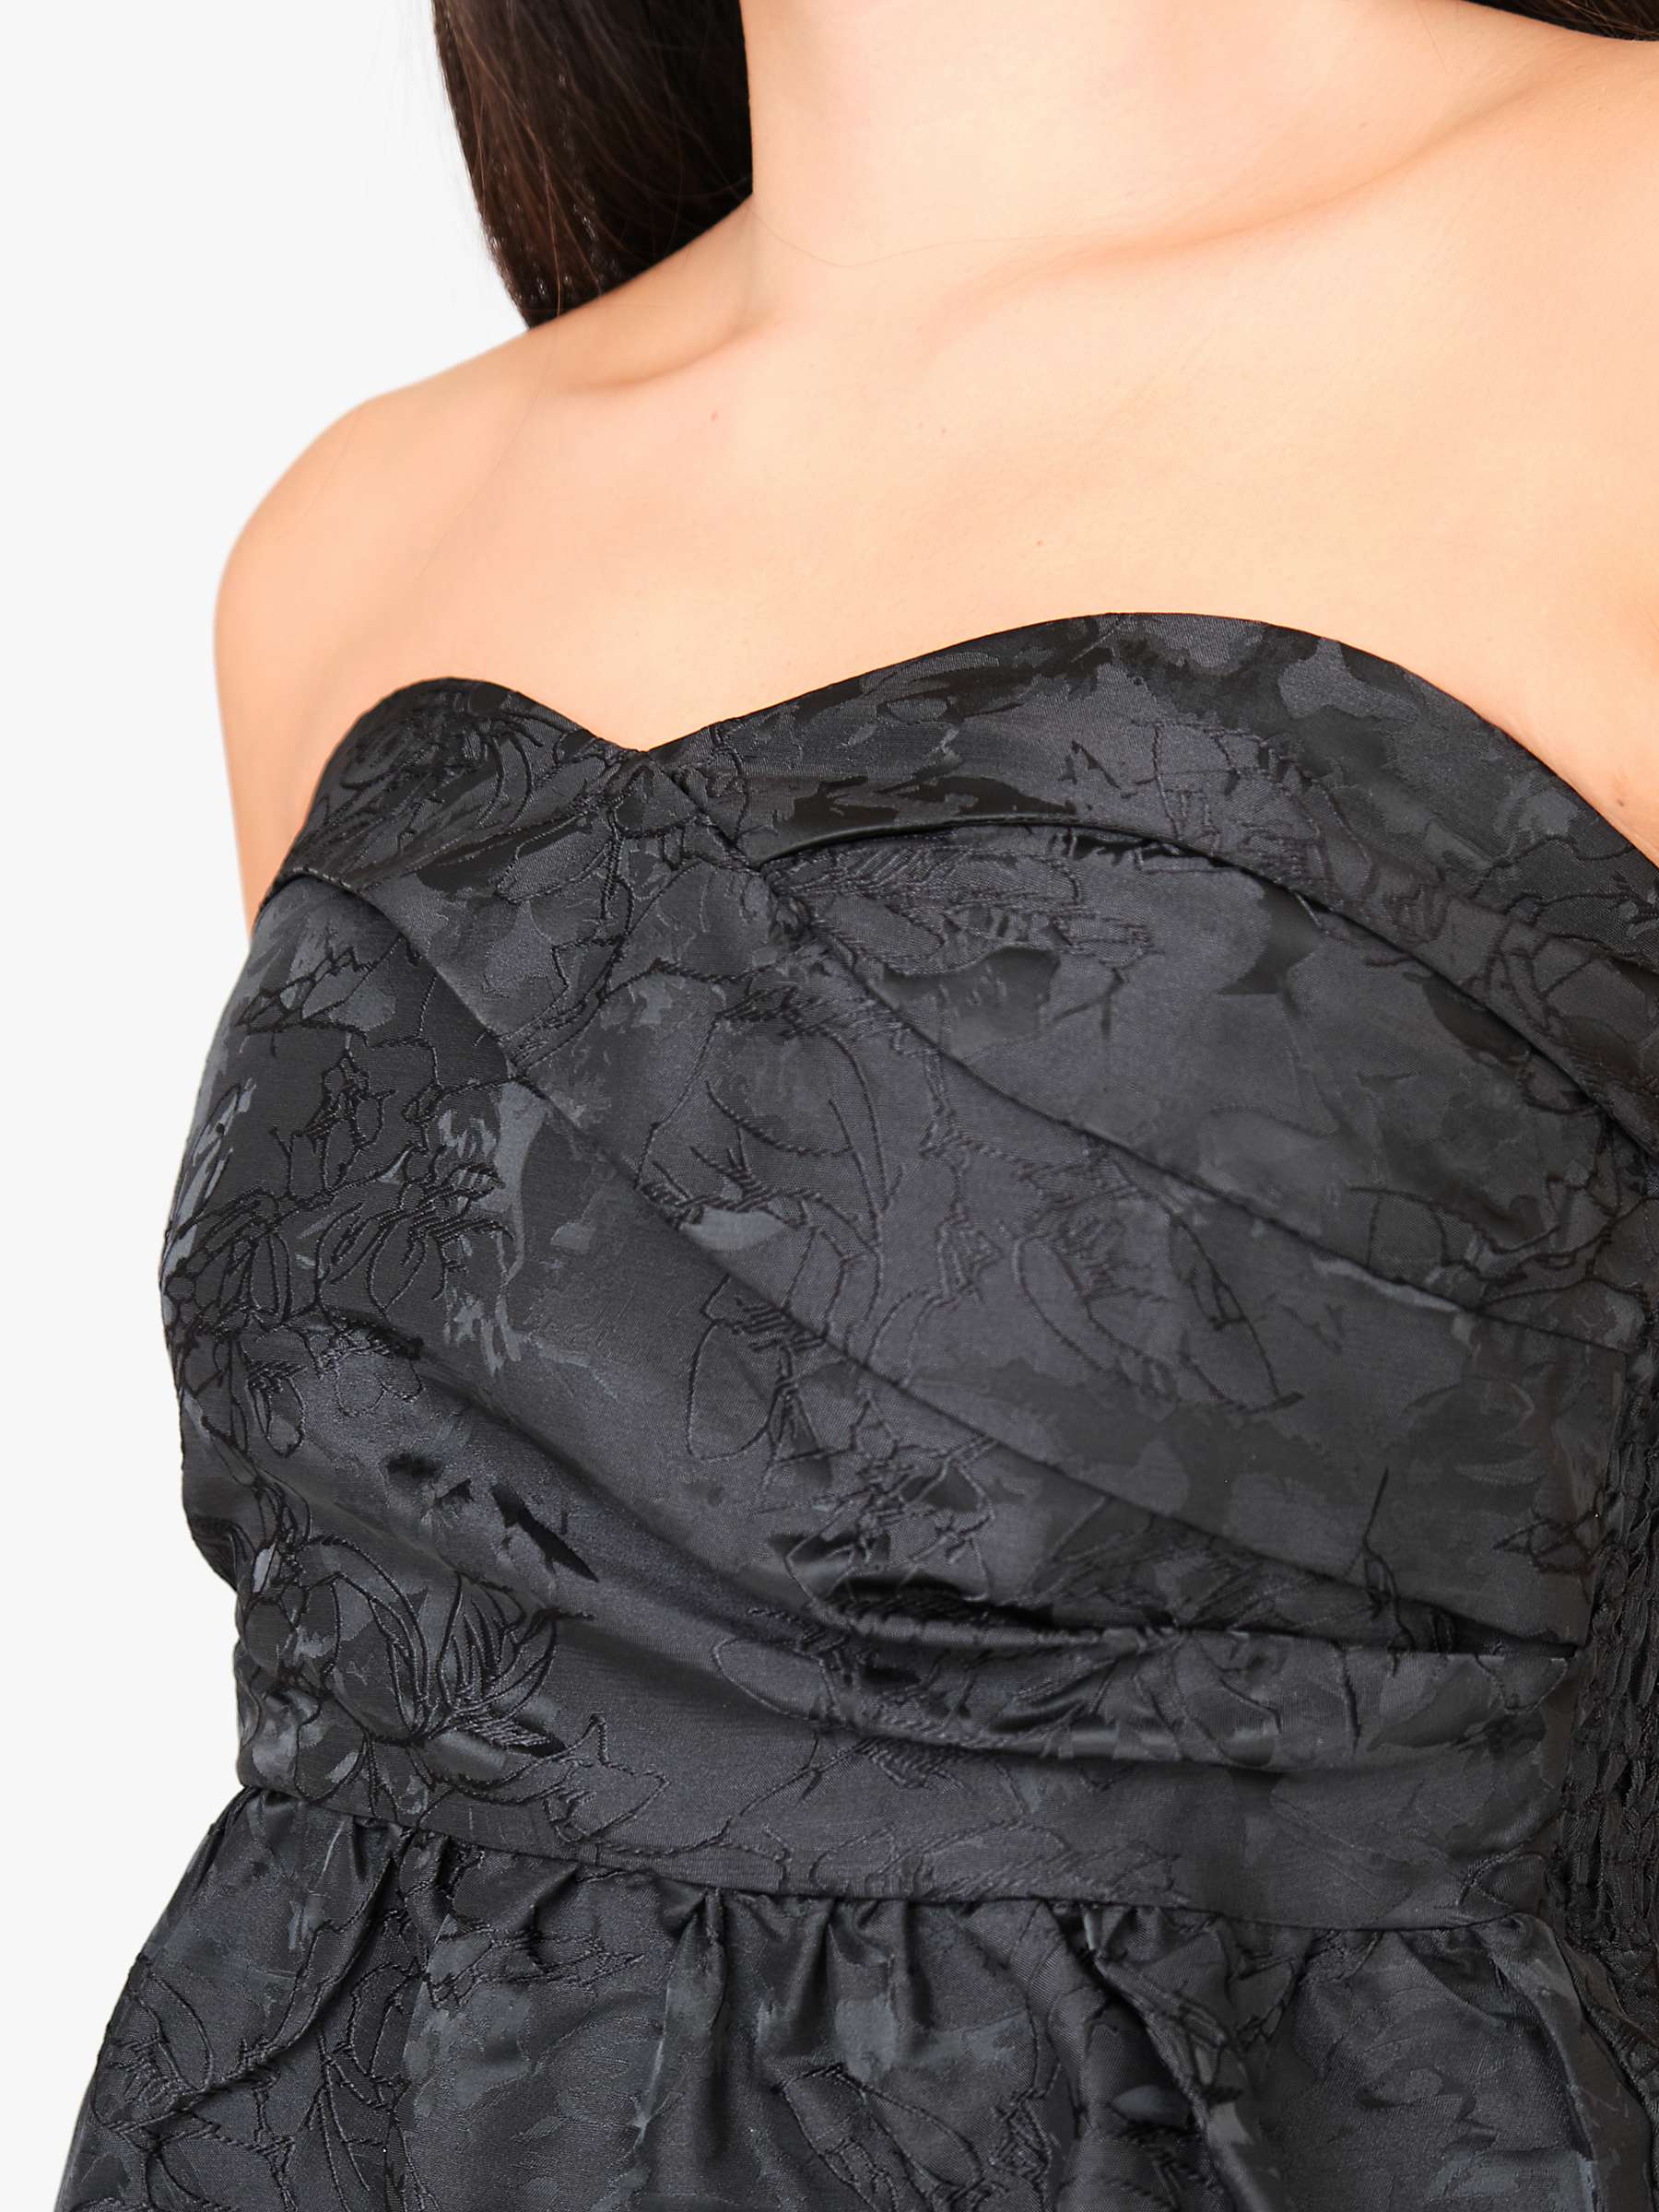 Buy A-VIEW Aria Strapless Peplum Top, Black Online at johnlewis.com